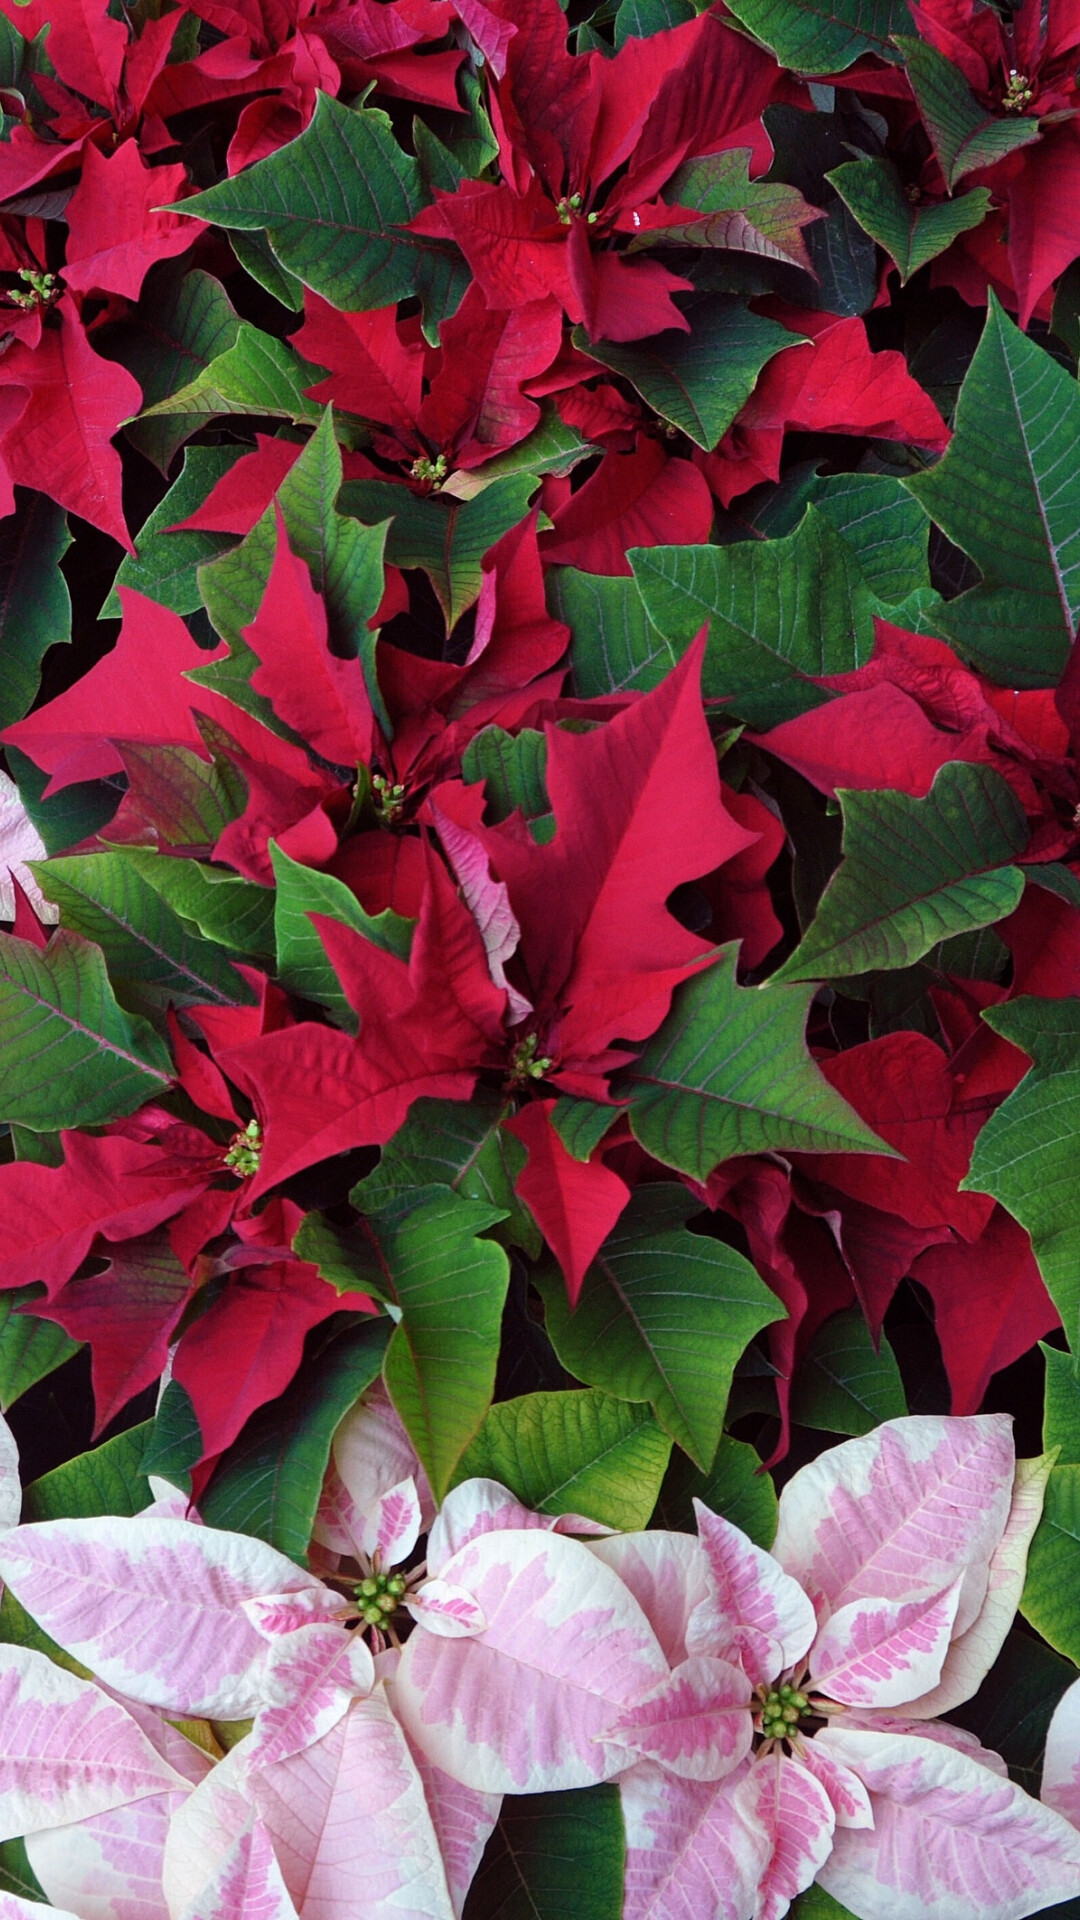 Poinsettia: The colorful bracts of these plants are leaves, not flowers, with the most common bract color being red. 1080x1920 Full HD Background.